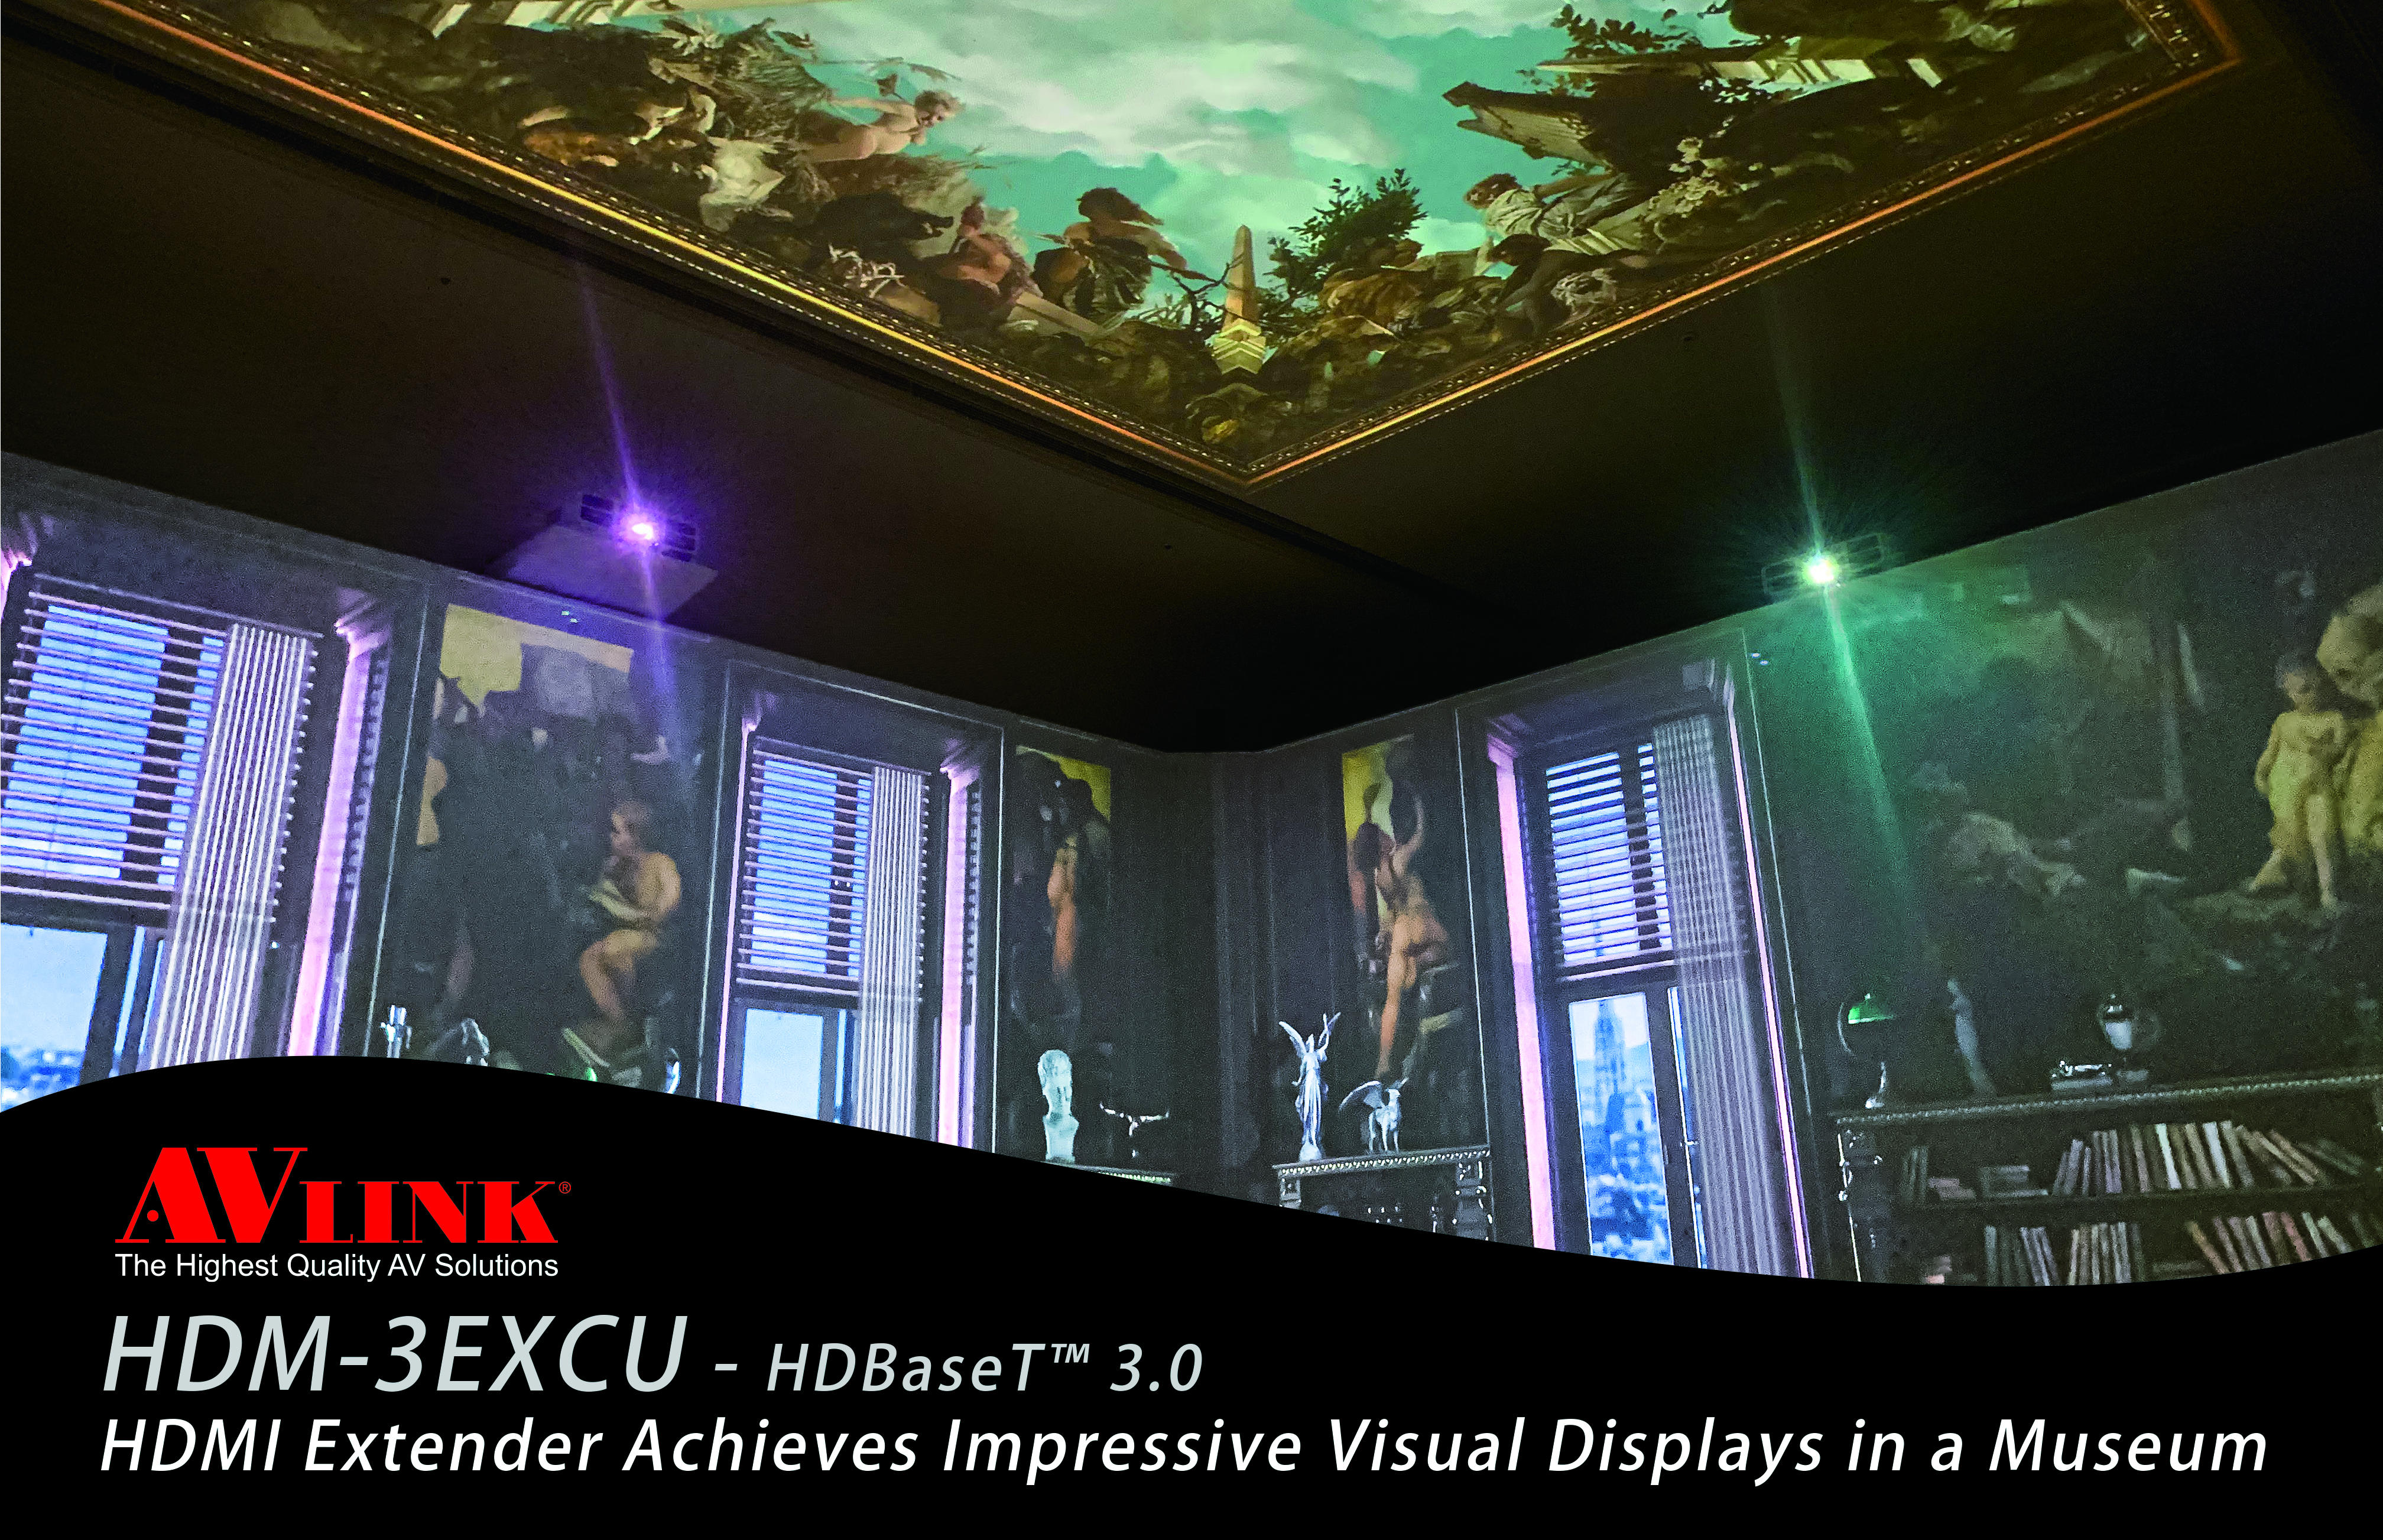 【STARE 3D Projection Mapping Powered by HDM-3EXCU Extender】